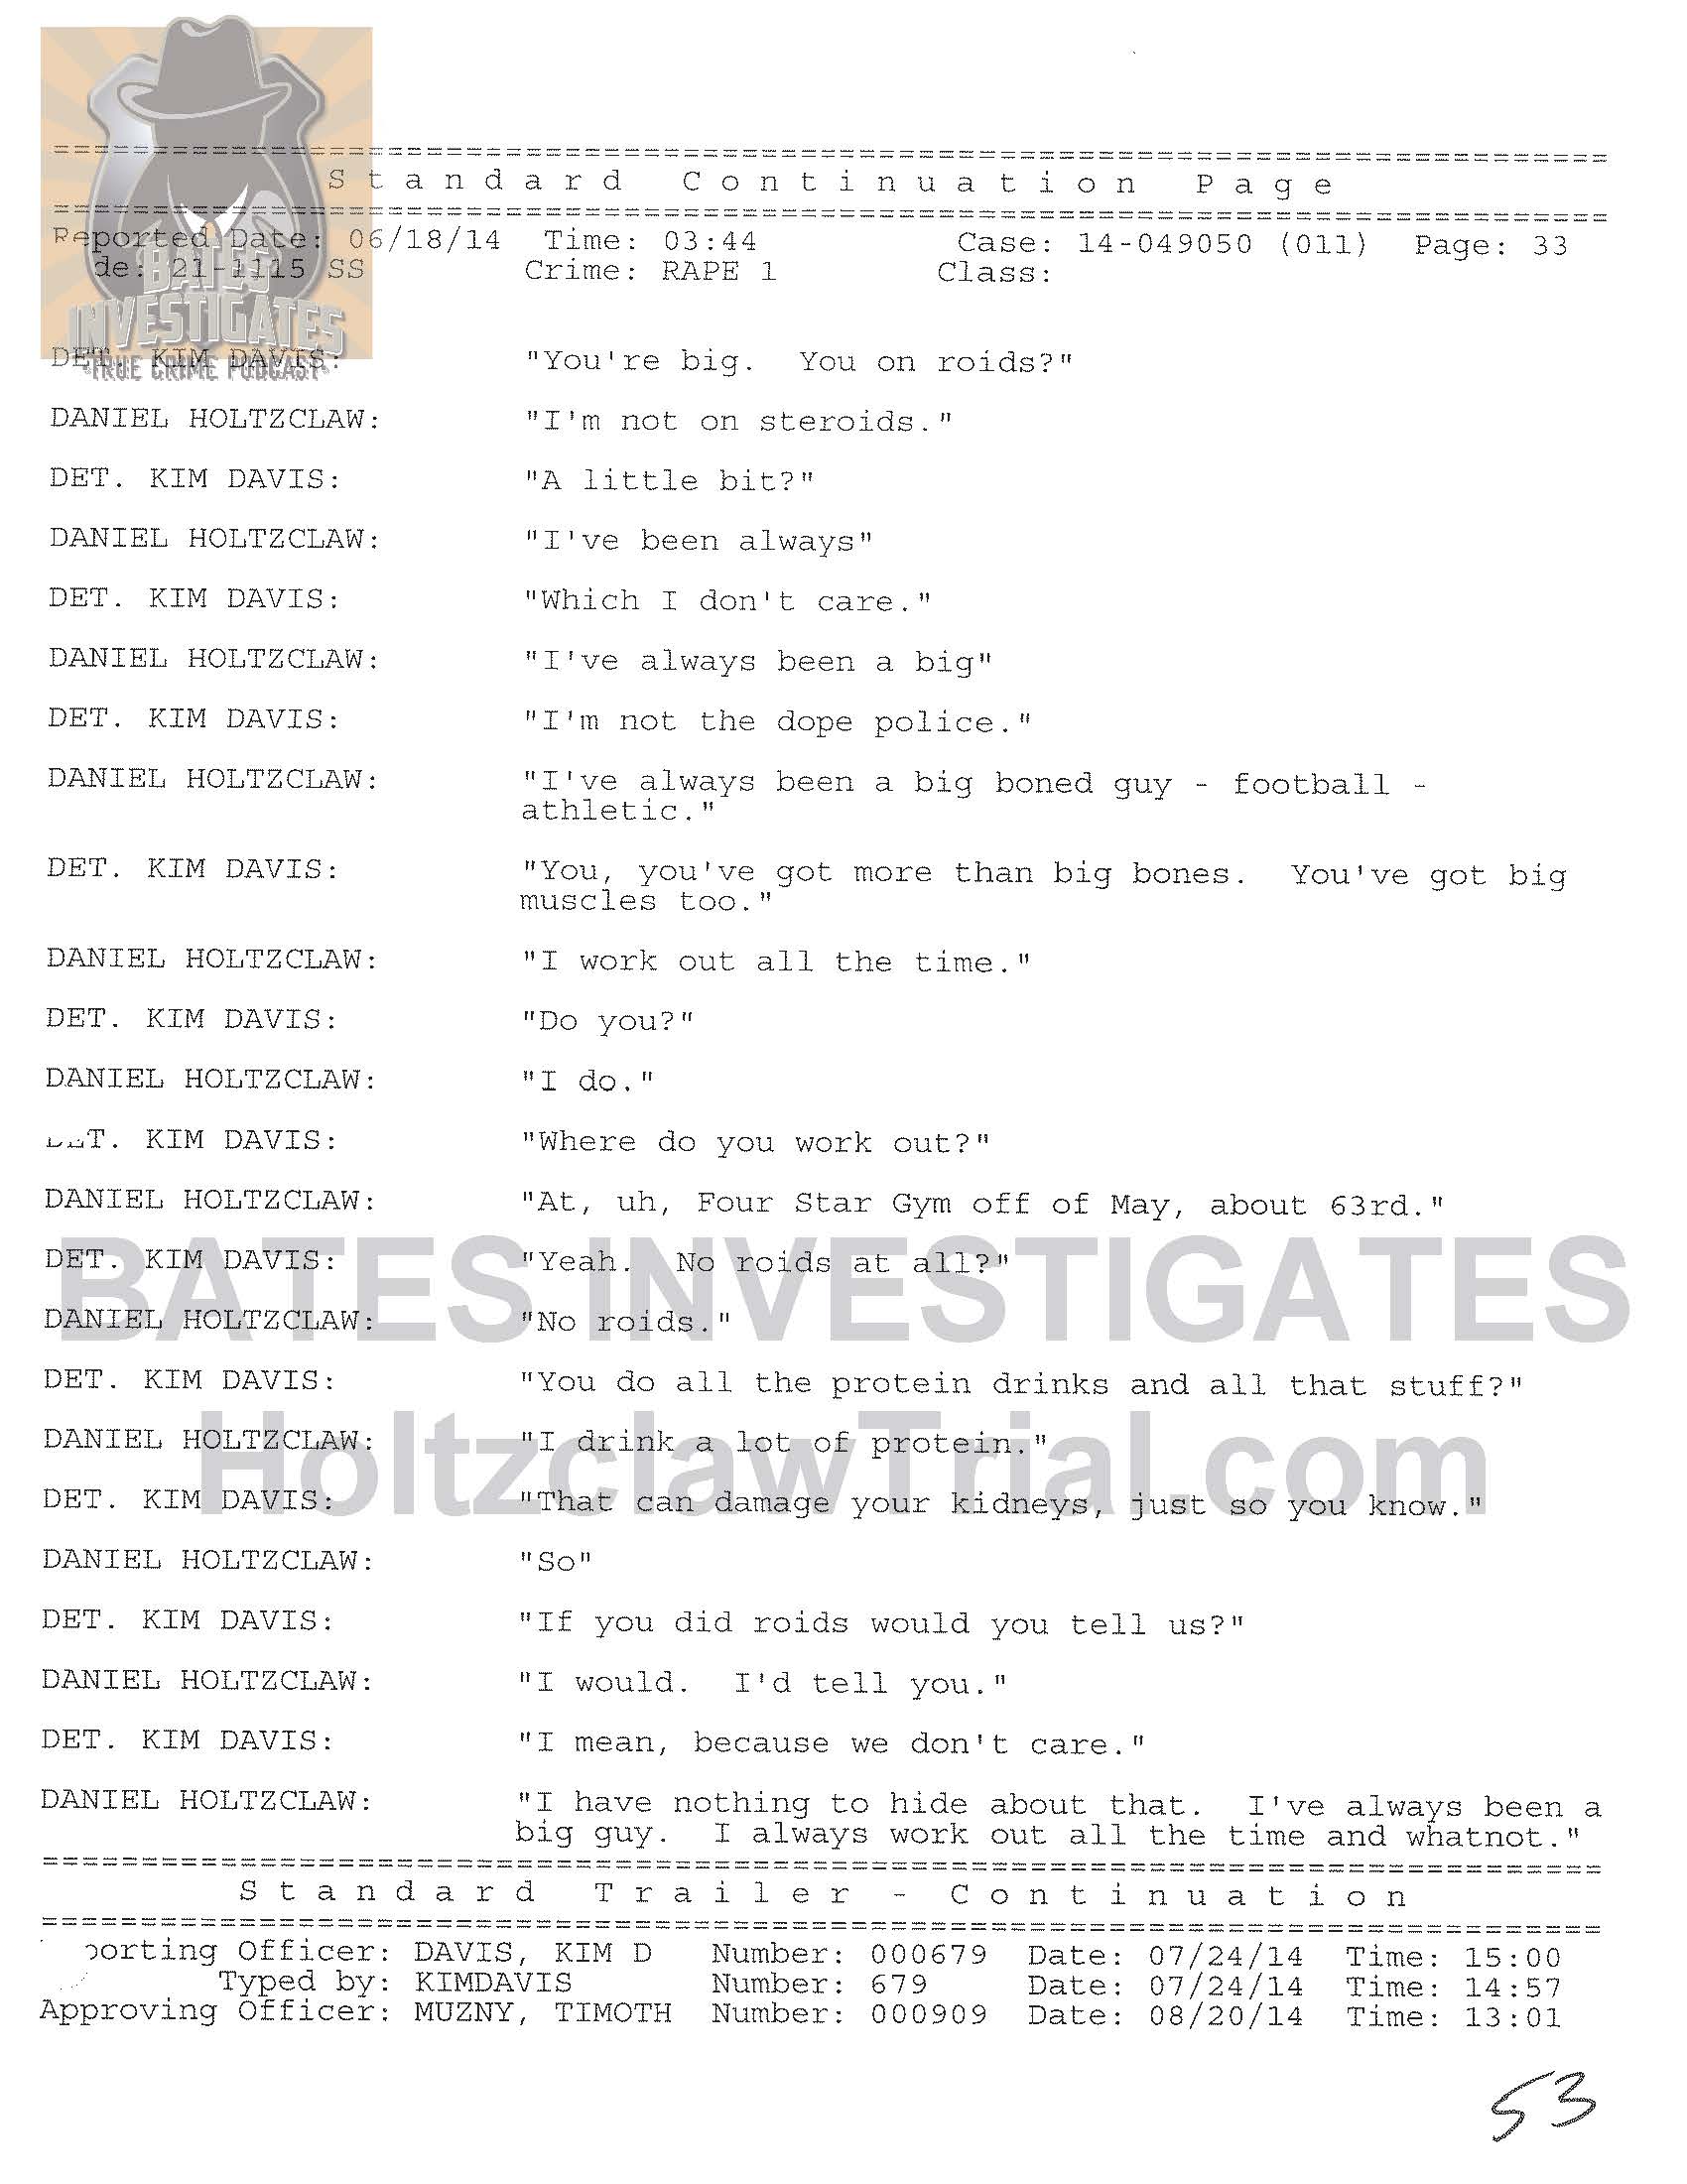 Holtzclaw Interrogation Transcript - Ep02 Redacted_Page_33.jpg